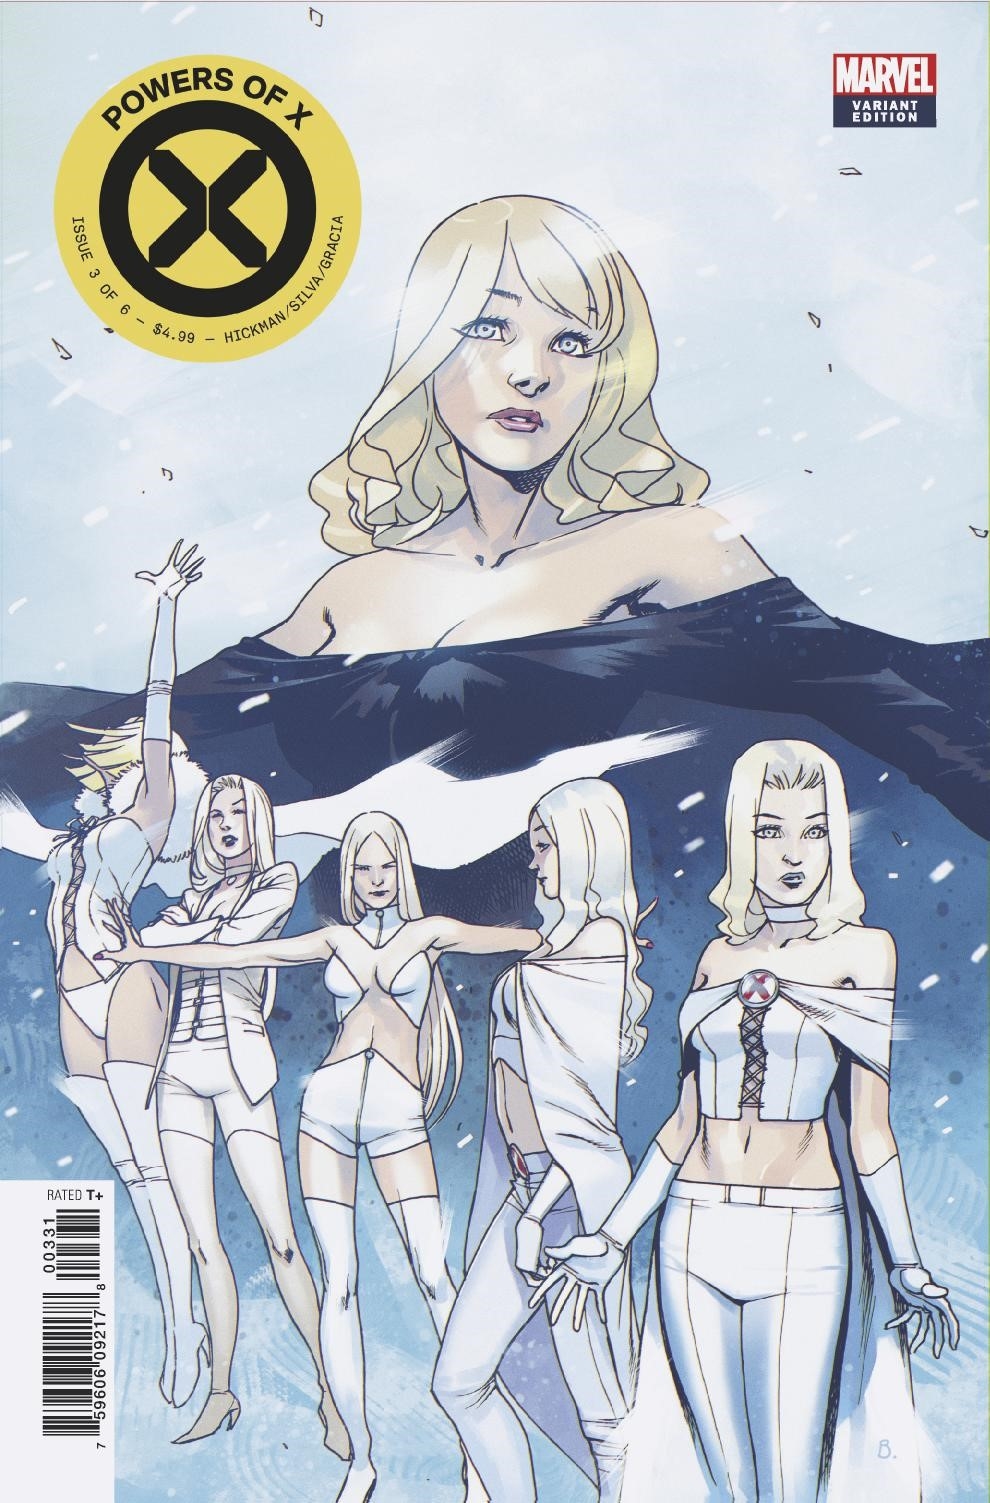 Powers of X no. 3 (3 of 6) (Variant) (2019 Series)